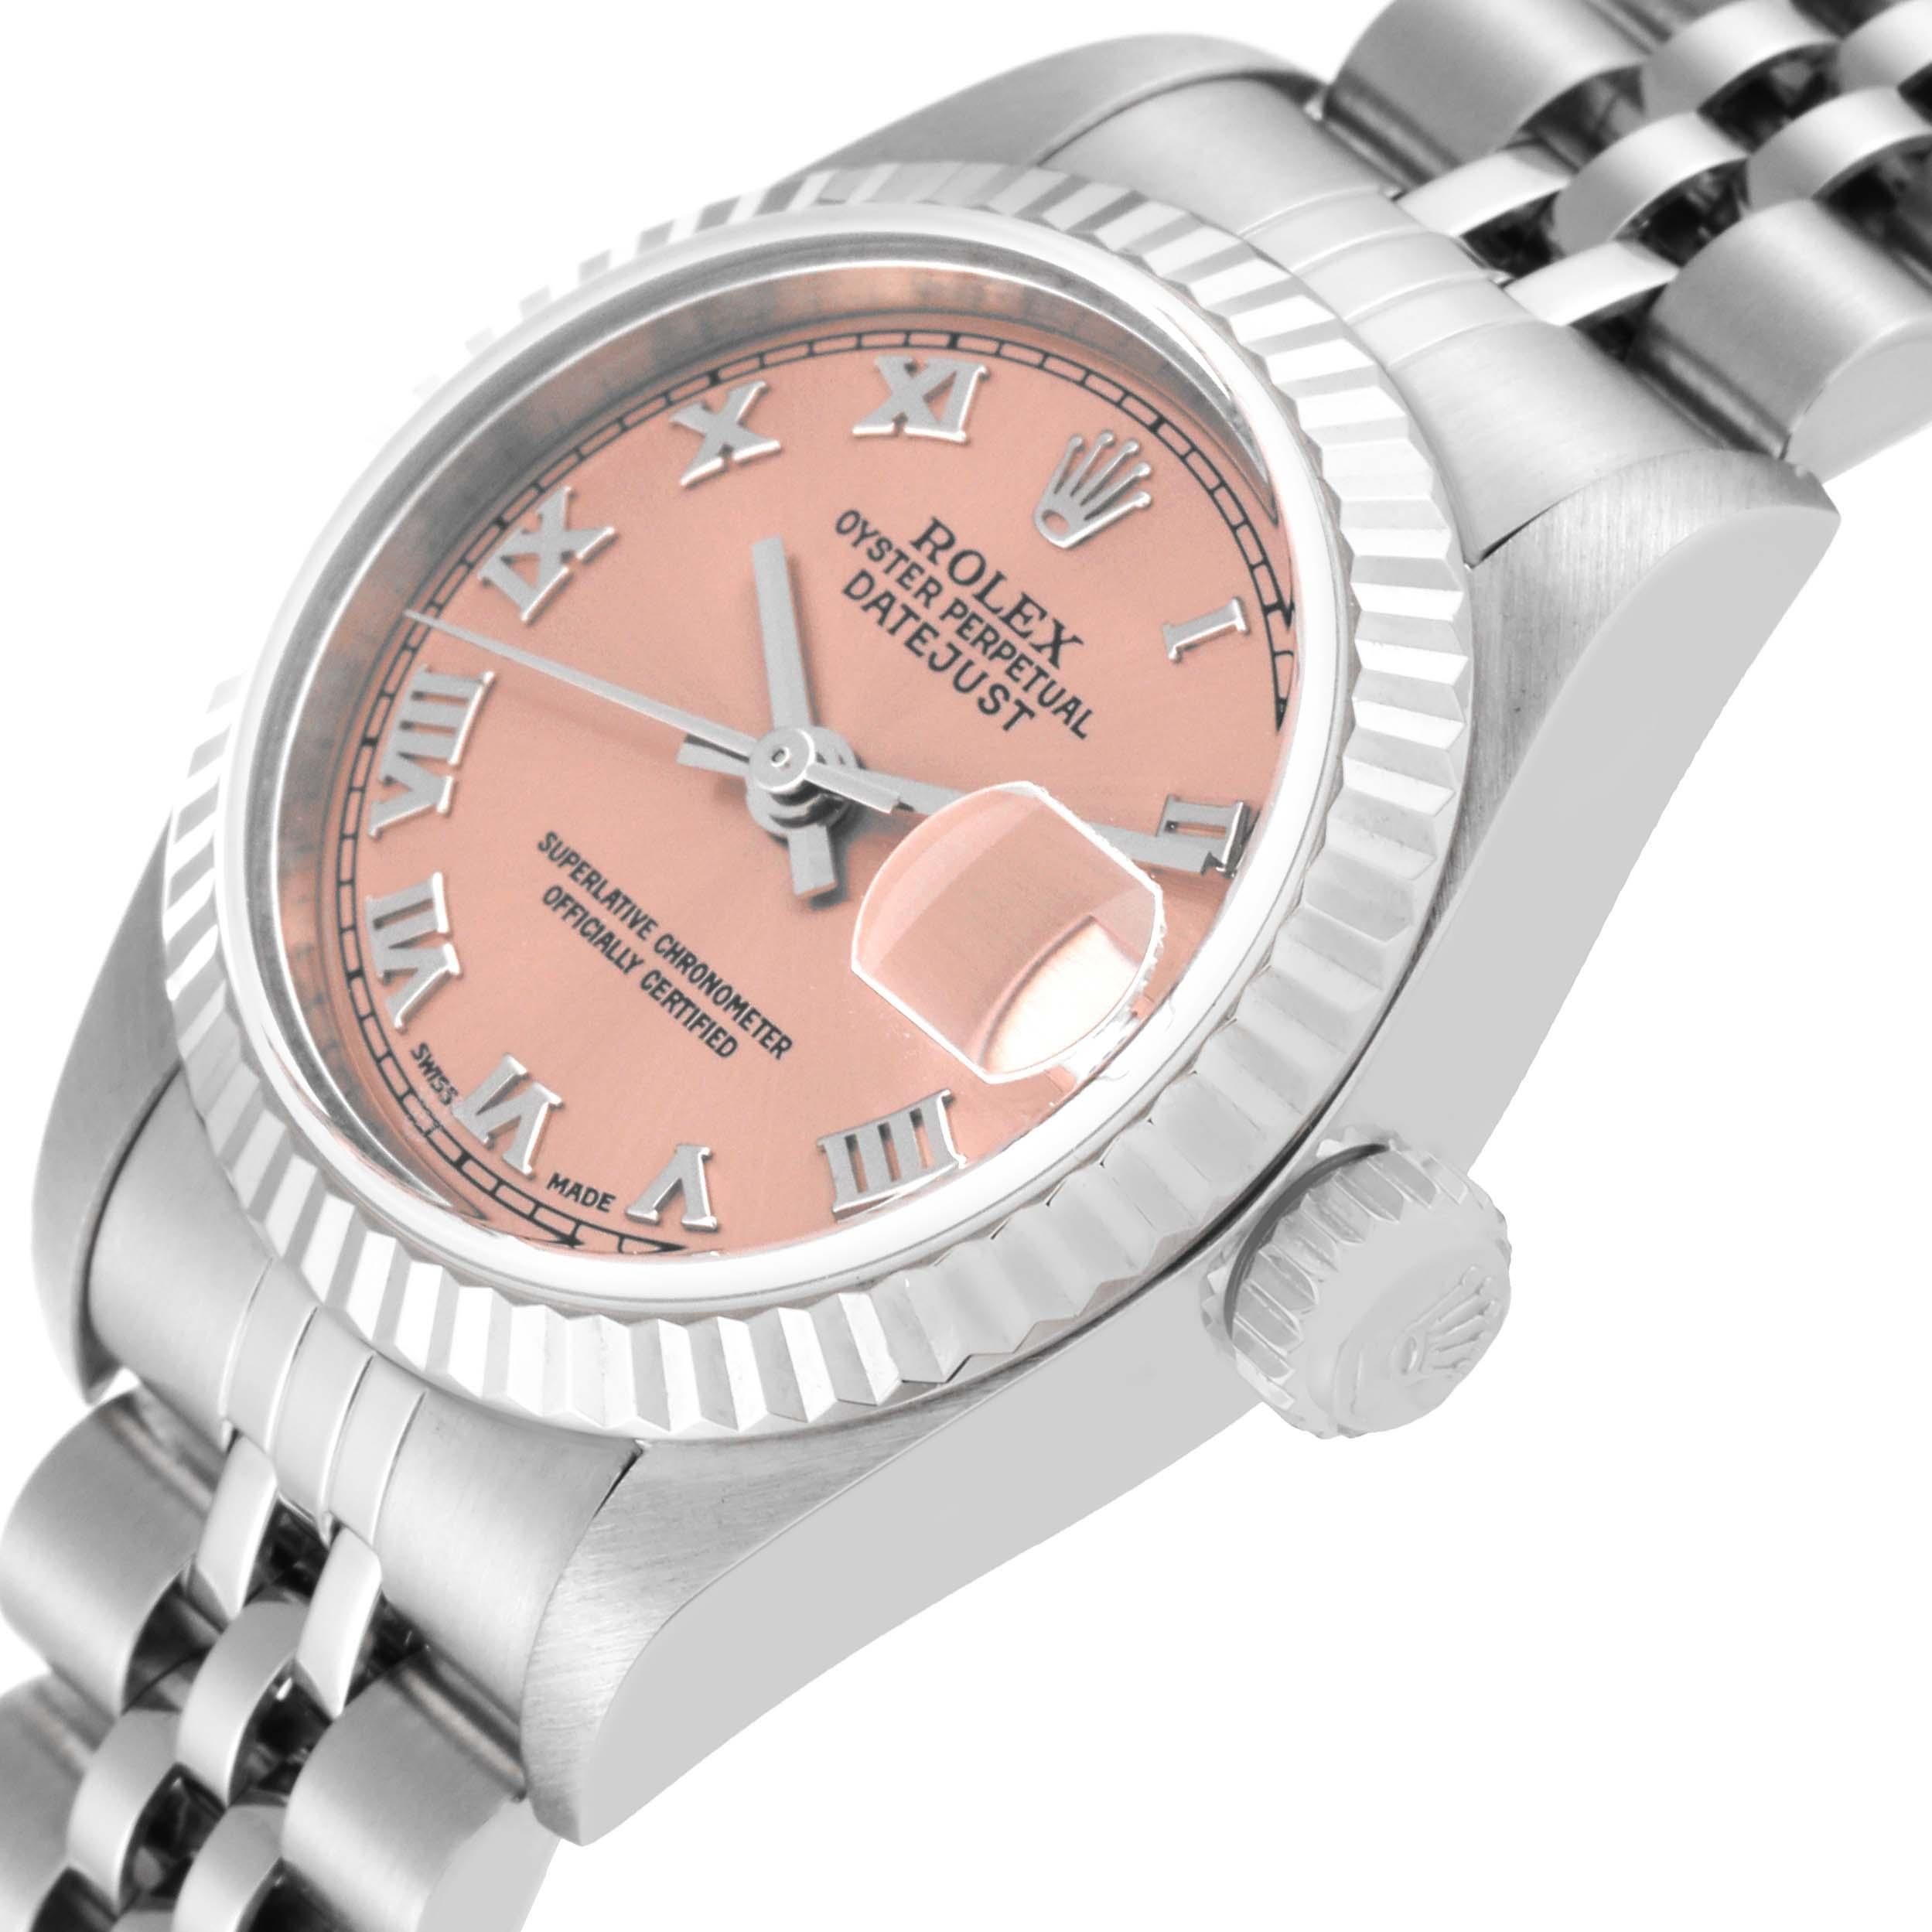 Women's Rolex Datejust White Gold Salmon Dial Steel Ladies Watch 79174 Box Papers